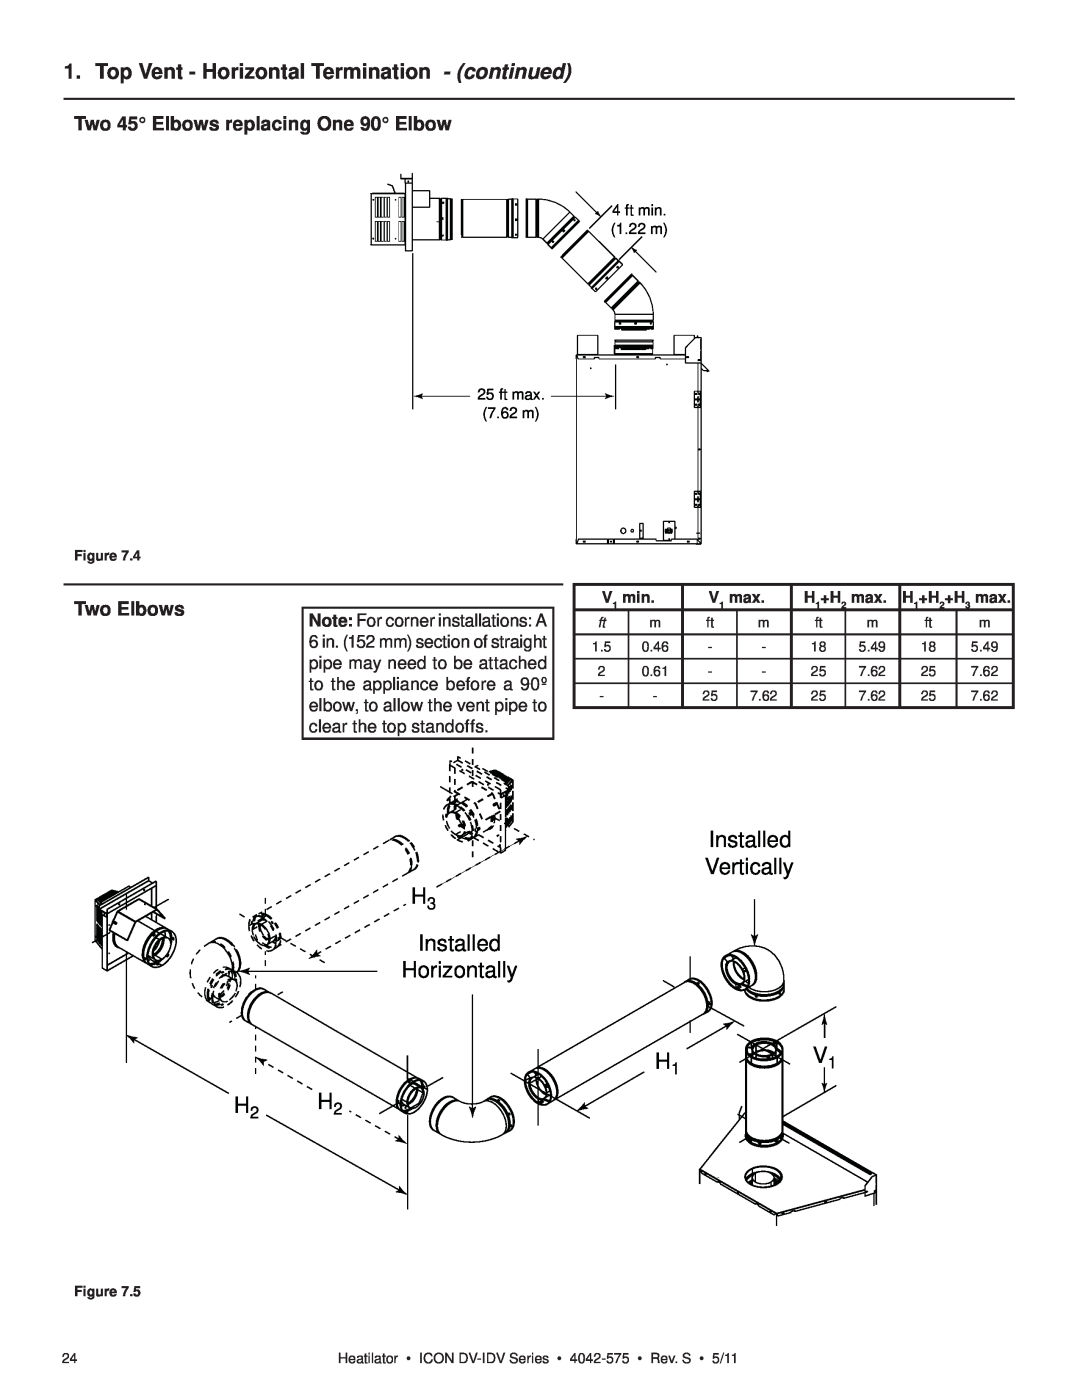 Heatiator IDV4833IT Top Vent - Horizontal Termination - continued, H3 Installed Horizontally, Installed Vertically, V1 min 